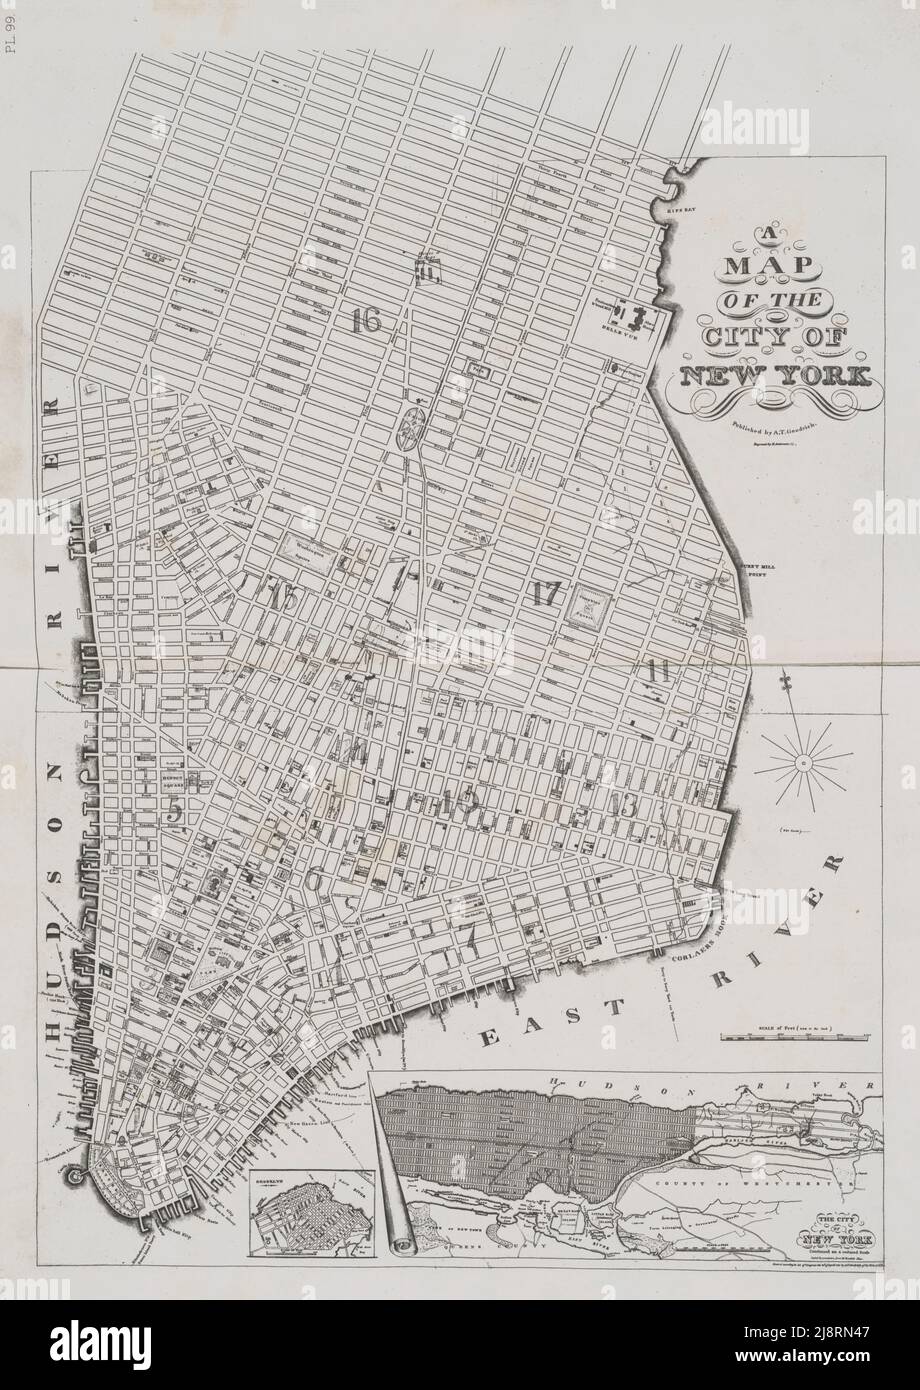 A Map of the City of New York [The Goodrich Plan] 1836 The iconography of Manhattan Island, 1498-1909 compiled from original sources and illustrated by photo-intaglio reproductions of important maps, plans, views, and documents in public and private collections - Volume 3 by Isaac Newton Phelps Stokes, Publisher New York : Robert H. Dodd 1918 Stock Photo